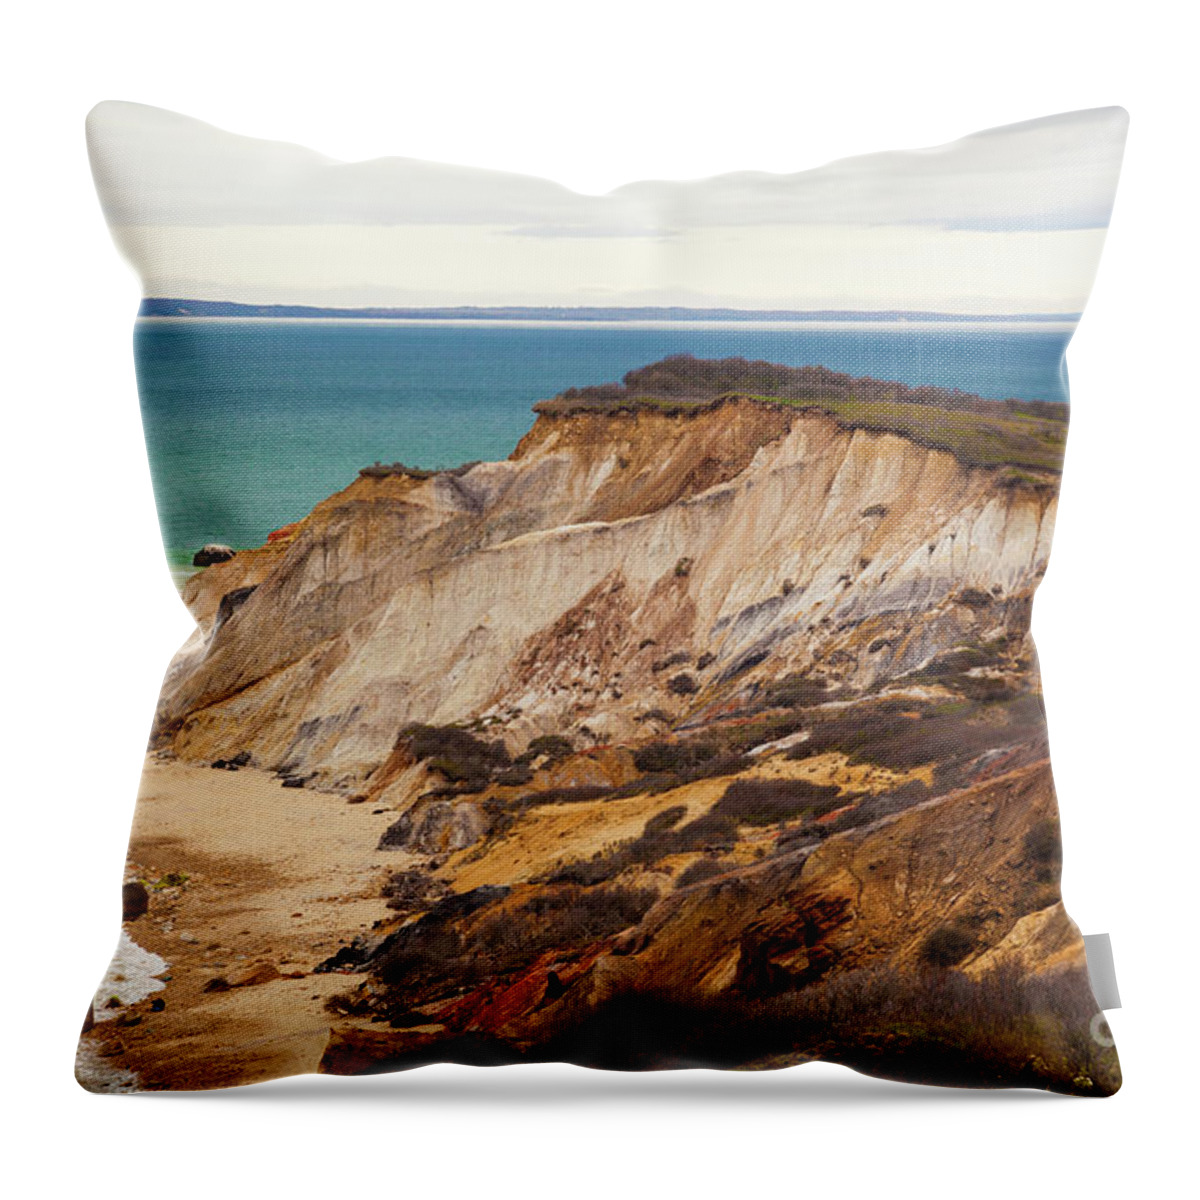 Colorful Clay Cliffs On The Vineyard Throw Pillow featuring the photograph Colorful Clay Cliffs on The Vineyard by Michelle Constantine